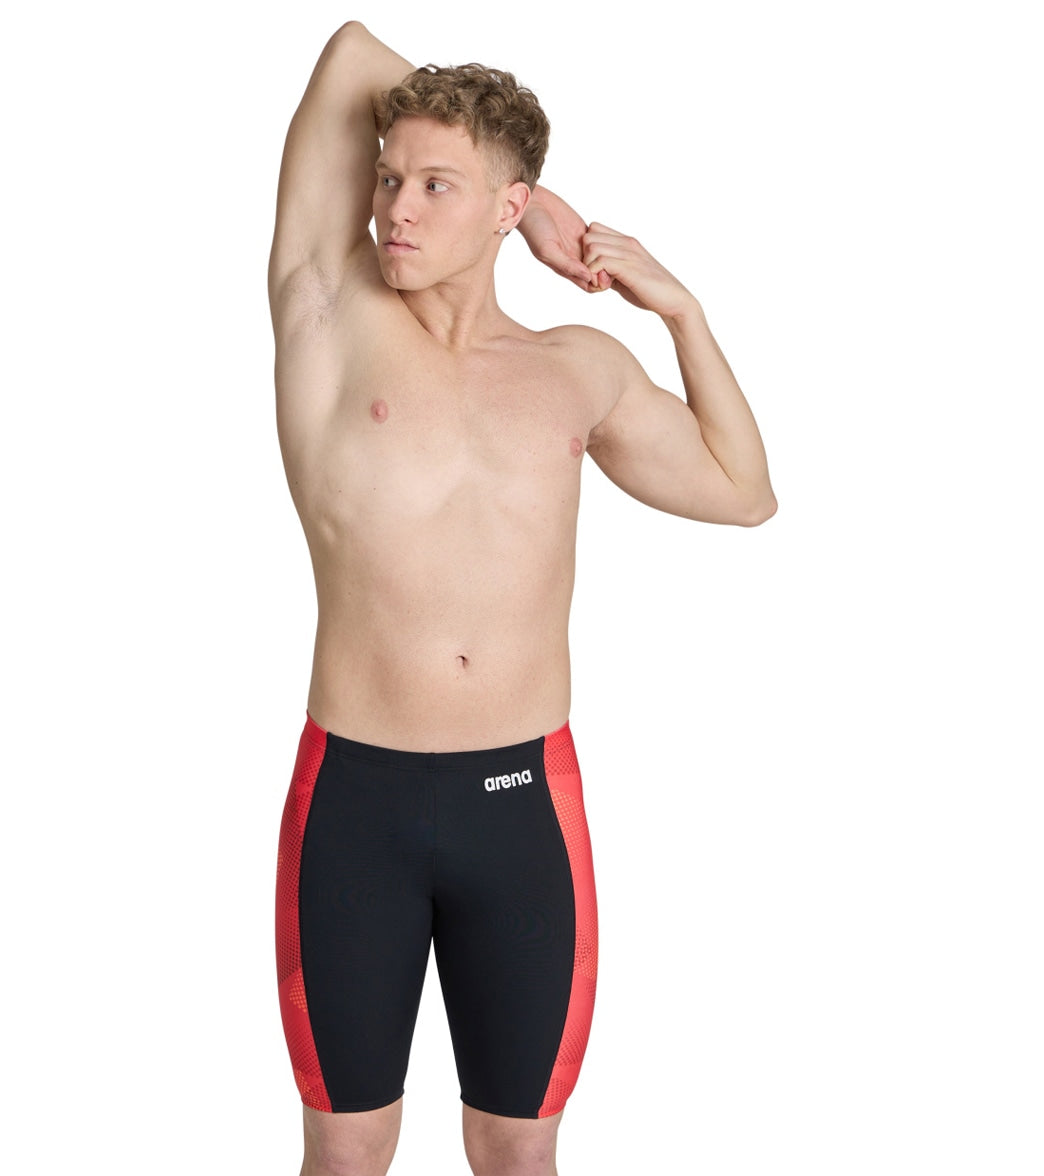 Arena Men's Halftone Jammer Swimsuit at SwimOutlet.com